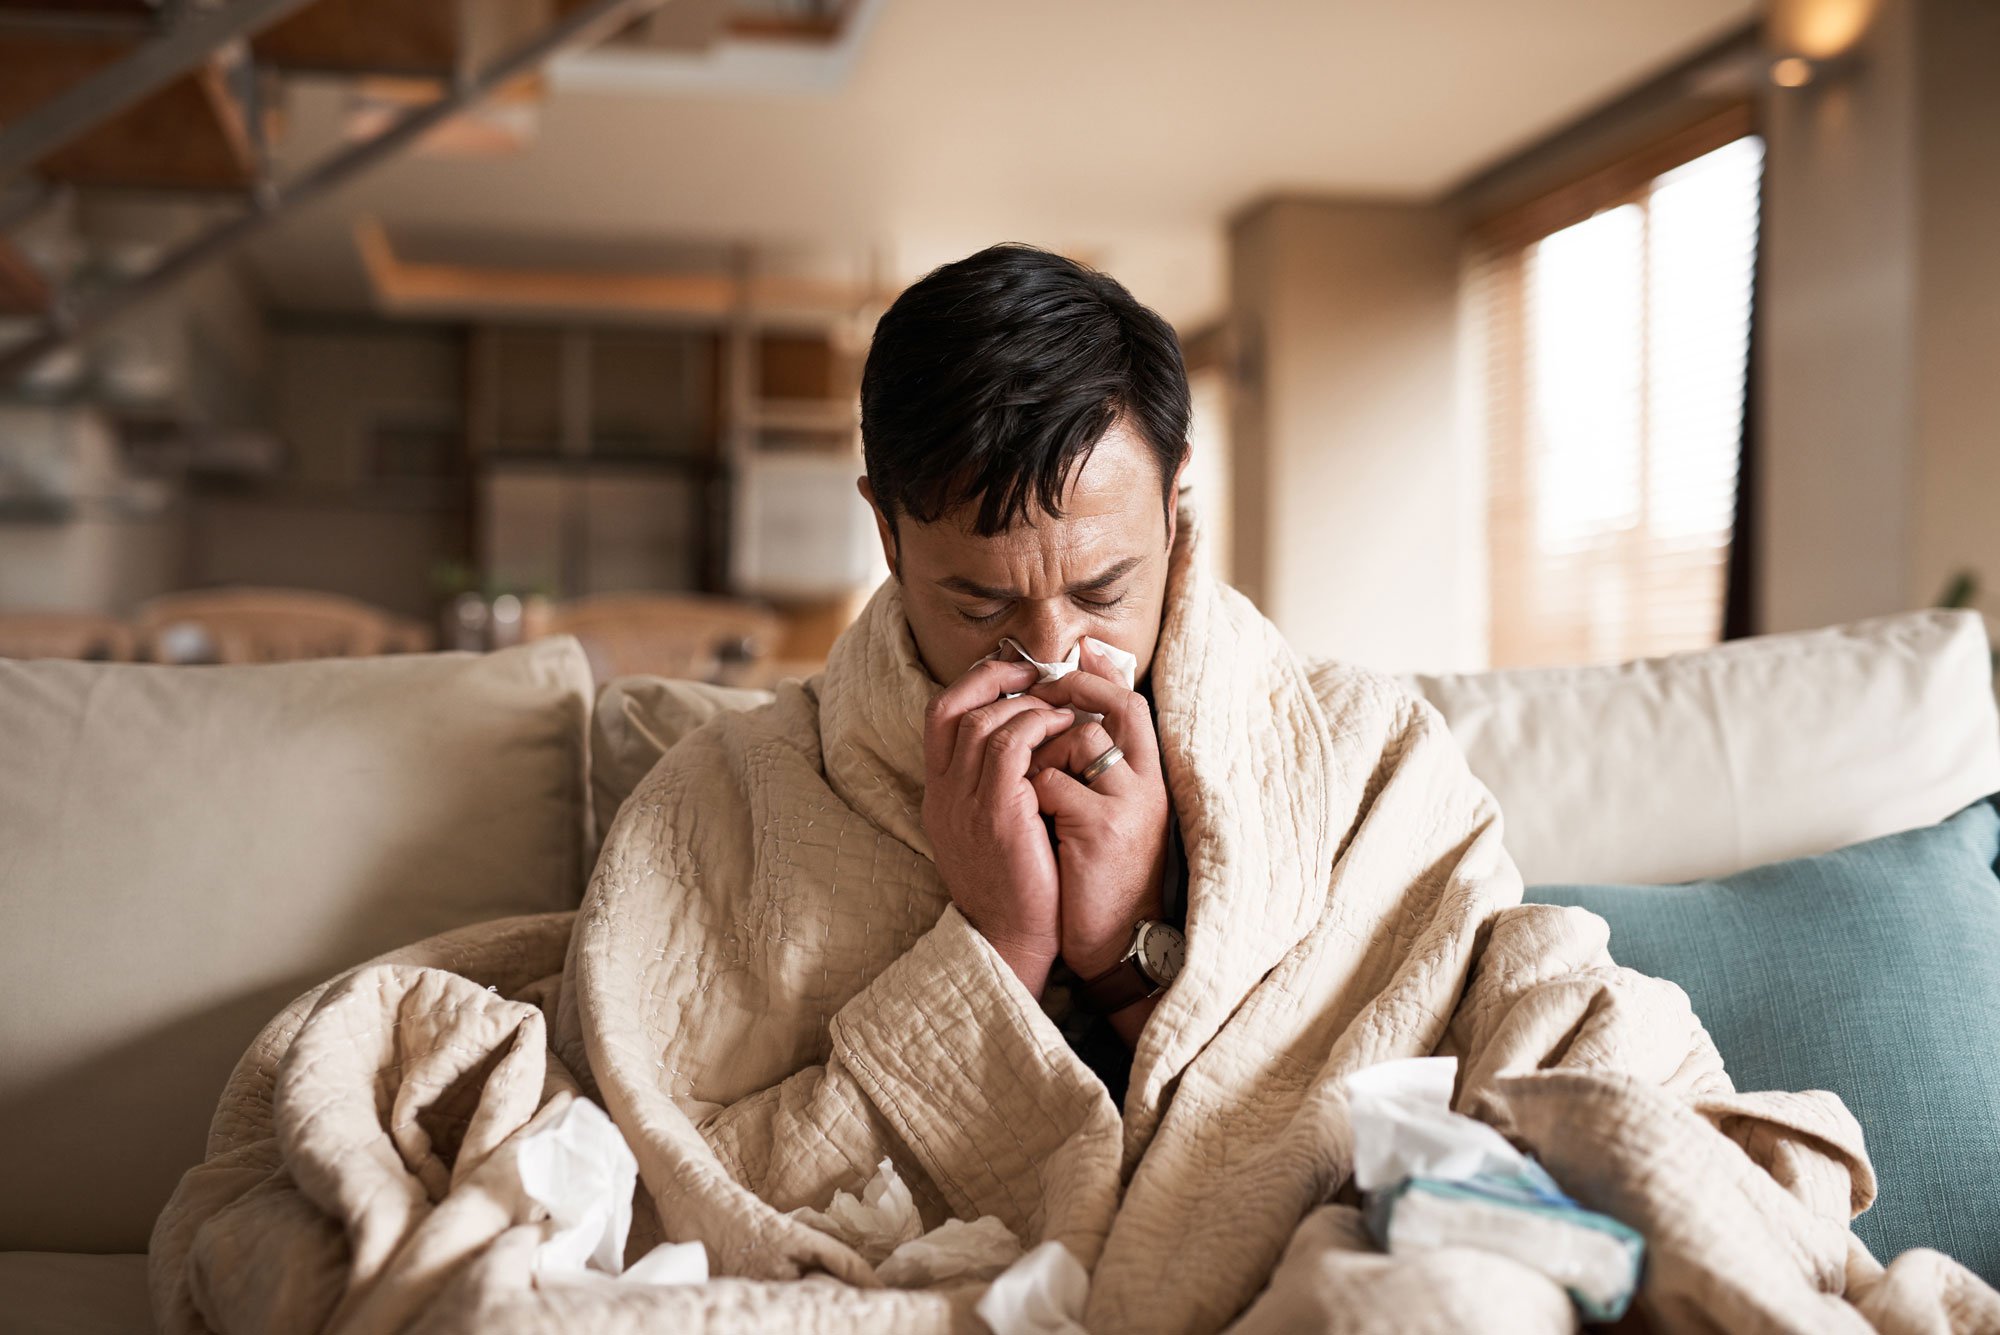 Man sitting on couch with a blanket wrapped around him, blowing his nose